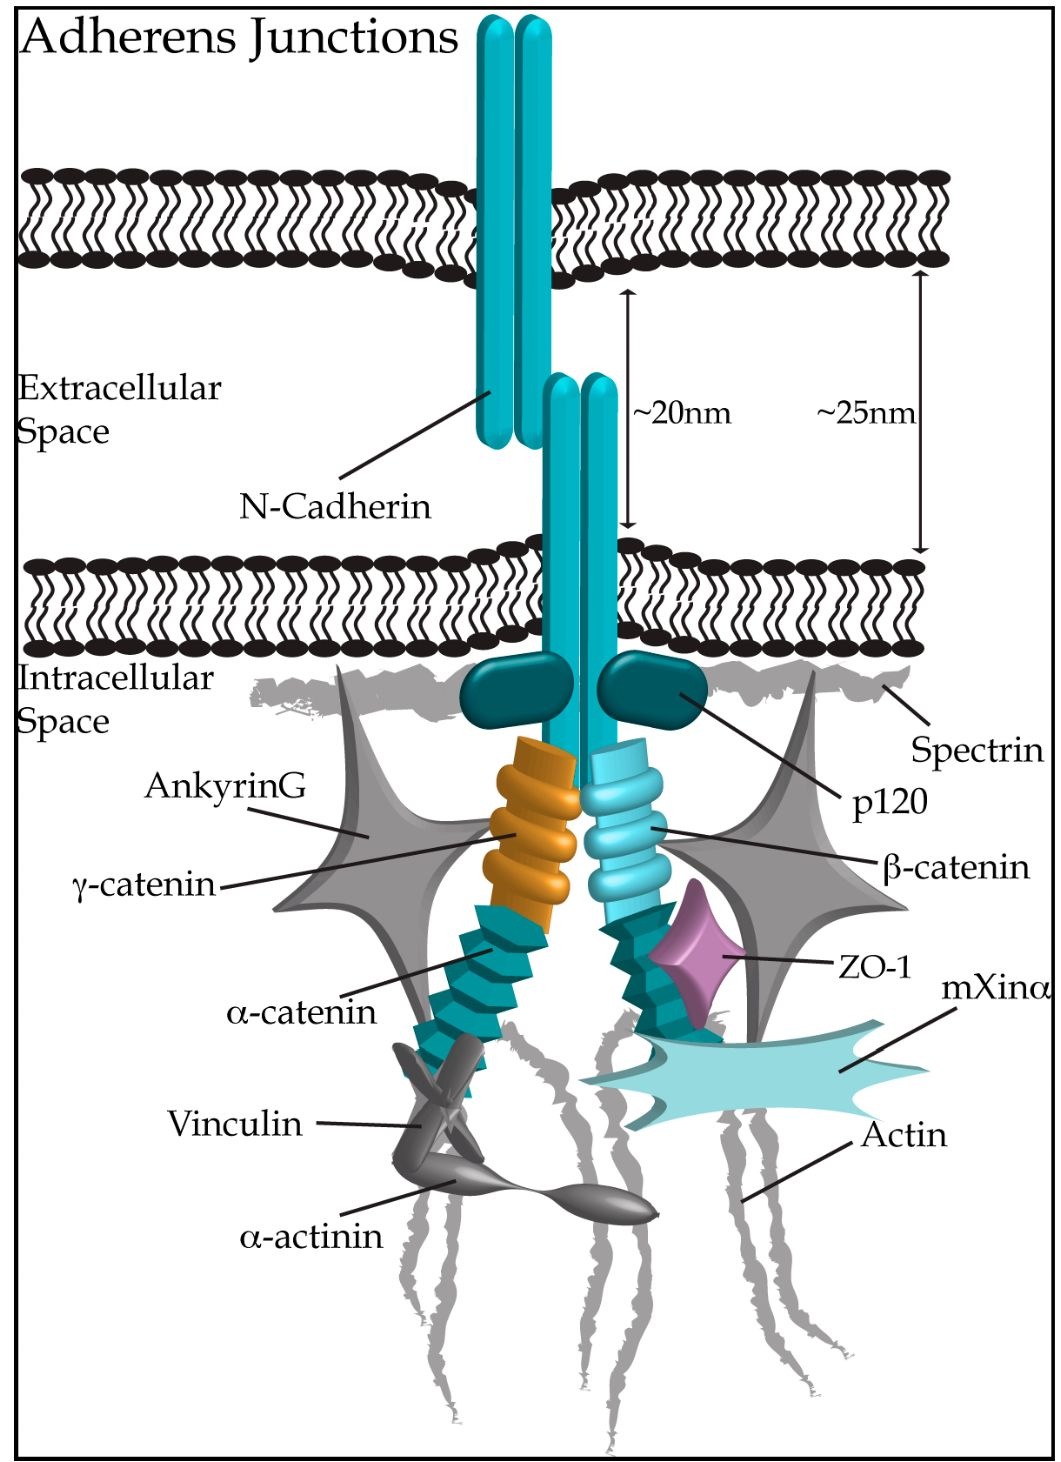 Adherens Junctions connect neighbouring cardiomyocytes through homophilic dimers of N-cadherin. Connections within the intracellular space link N-cadherin to the actin cytoskeleton (depicted in grey), via additional adherens junction proteins (shown in hues of teal), ie. p120 catenin, P-catenin, a-catenin and mXina. Proteins not traditionally considered as components of adherens junctions, but localizing to the ID are shown in grey. Proteins of other ID structures, ZO-1 (gap junctions) and y-catenin (desmosomes), are depicted in light purple and gold, respectively.